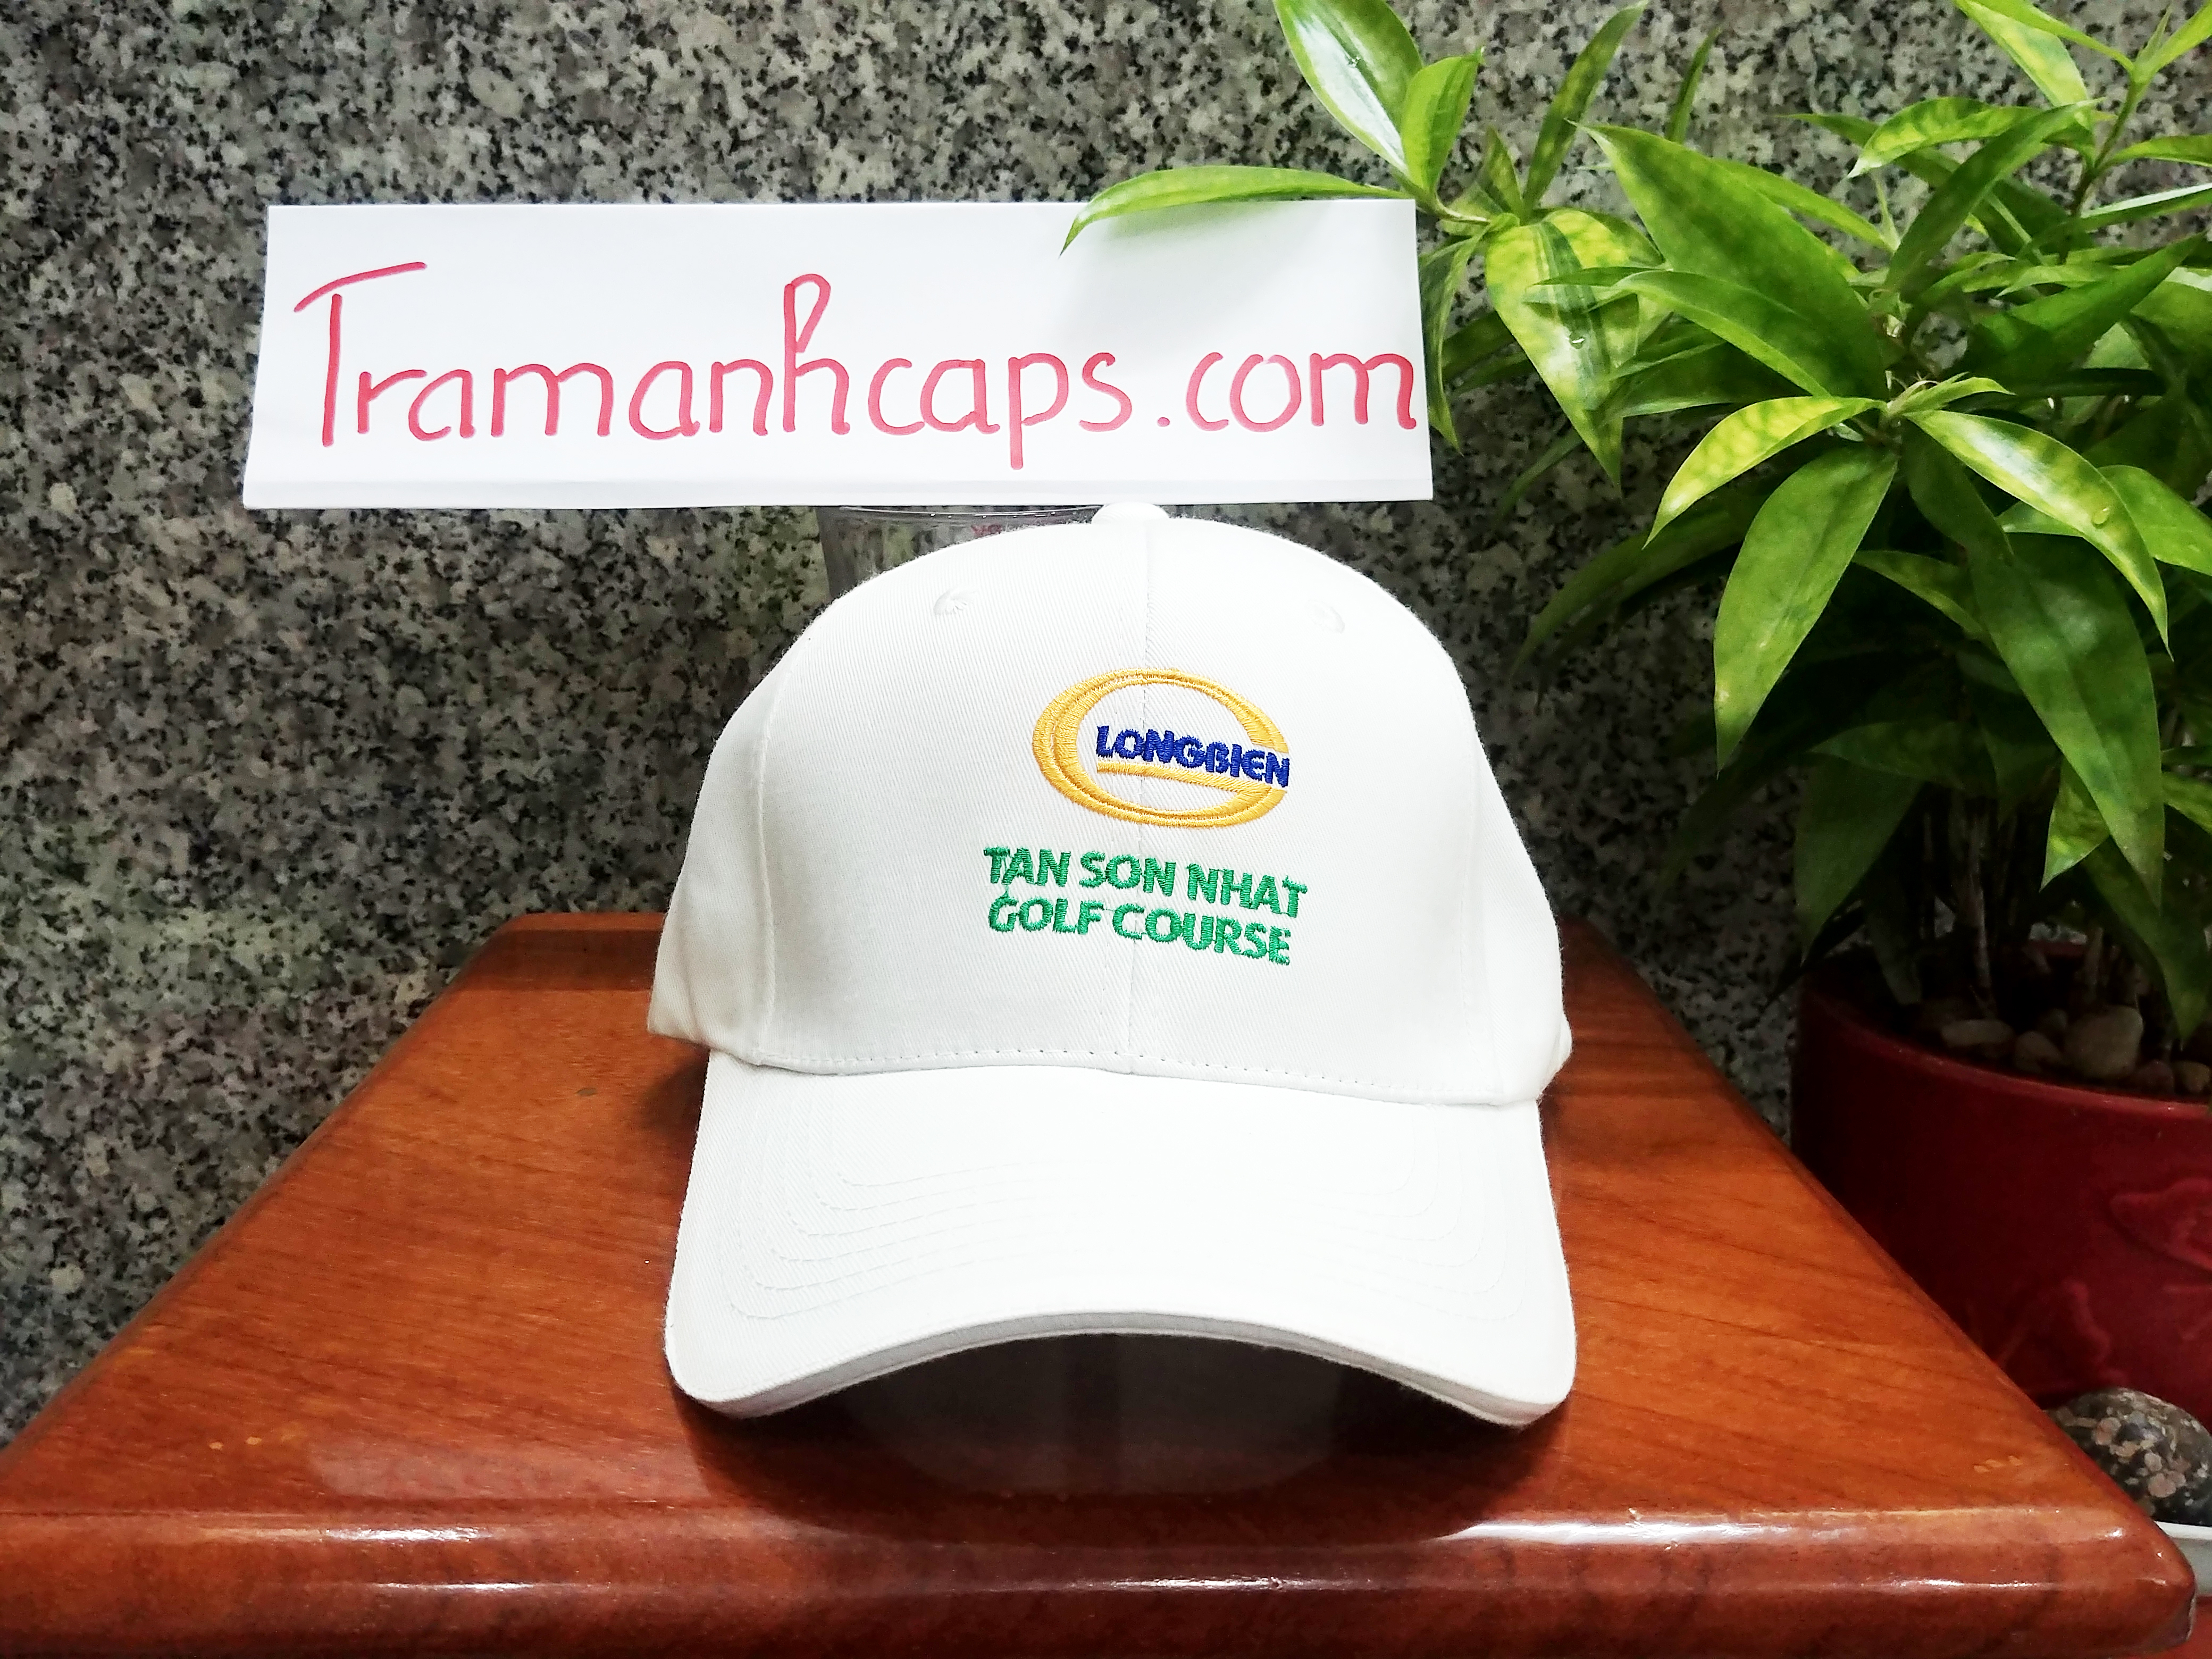 The sport cap of Tan Son Nhat Golf Course